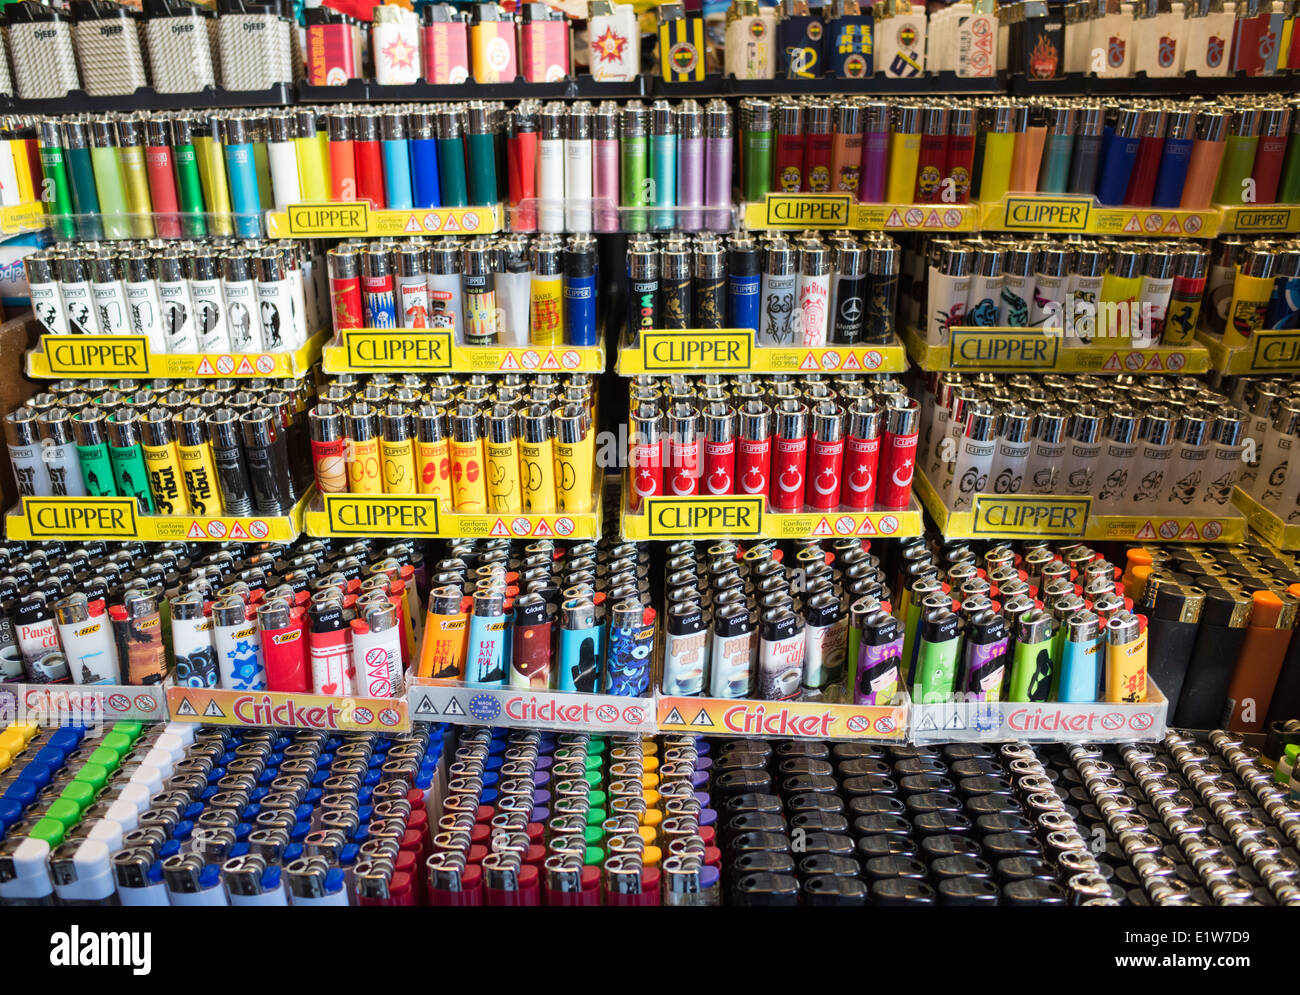 Lighter lighters stock photography and images - Alamy